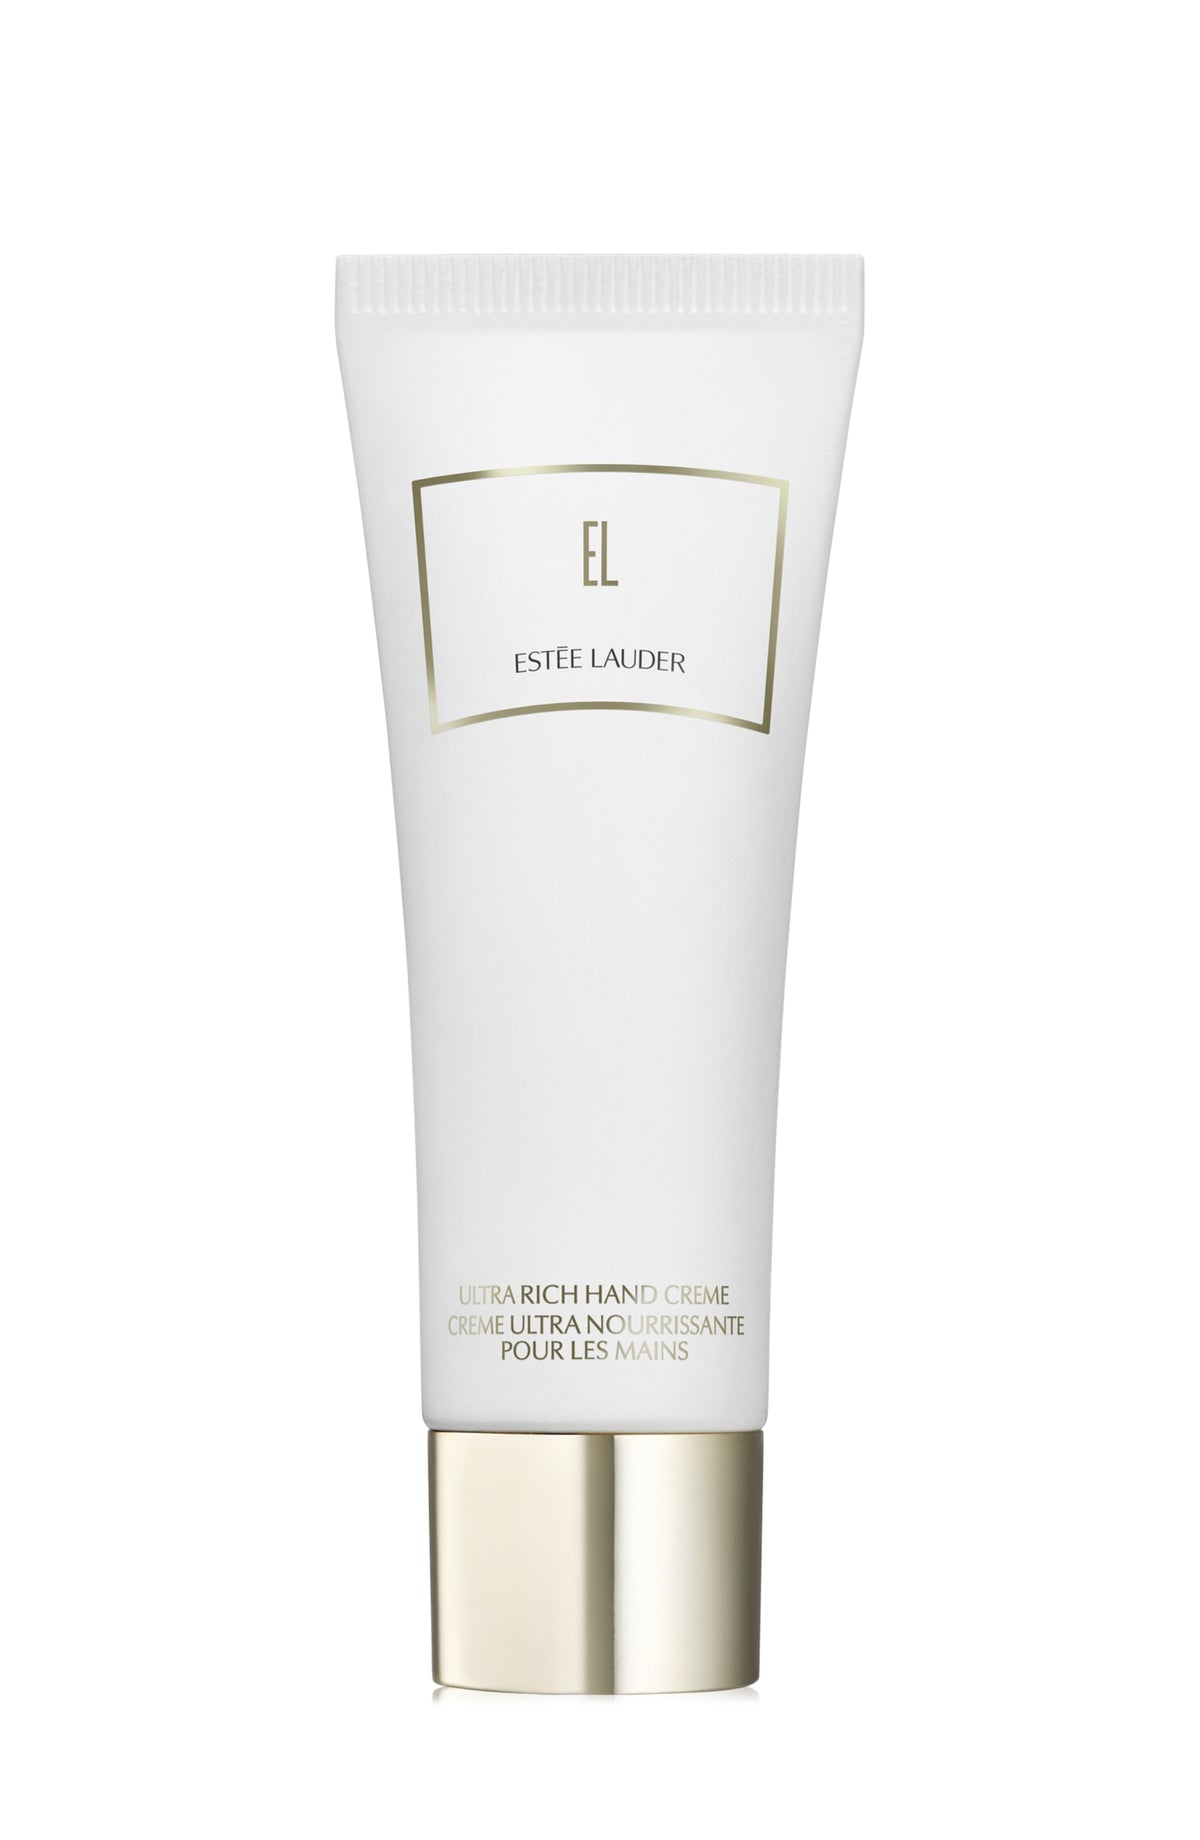 Estee Lauder Ultra Rich Hand Creme From the Luxury Collection